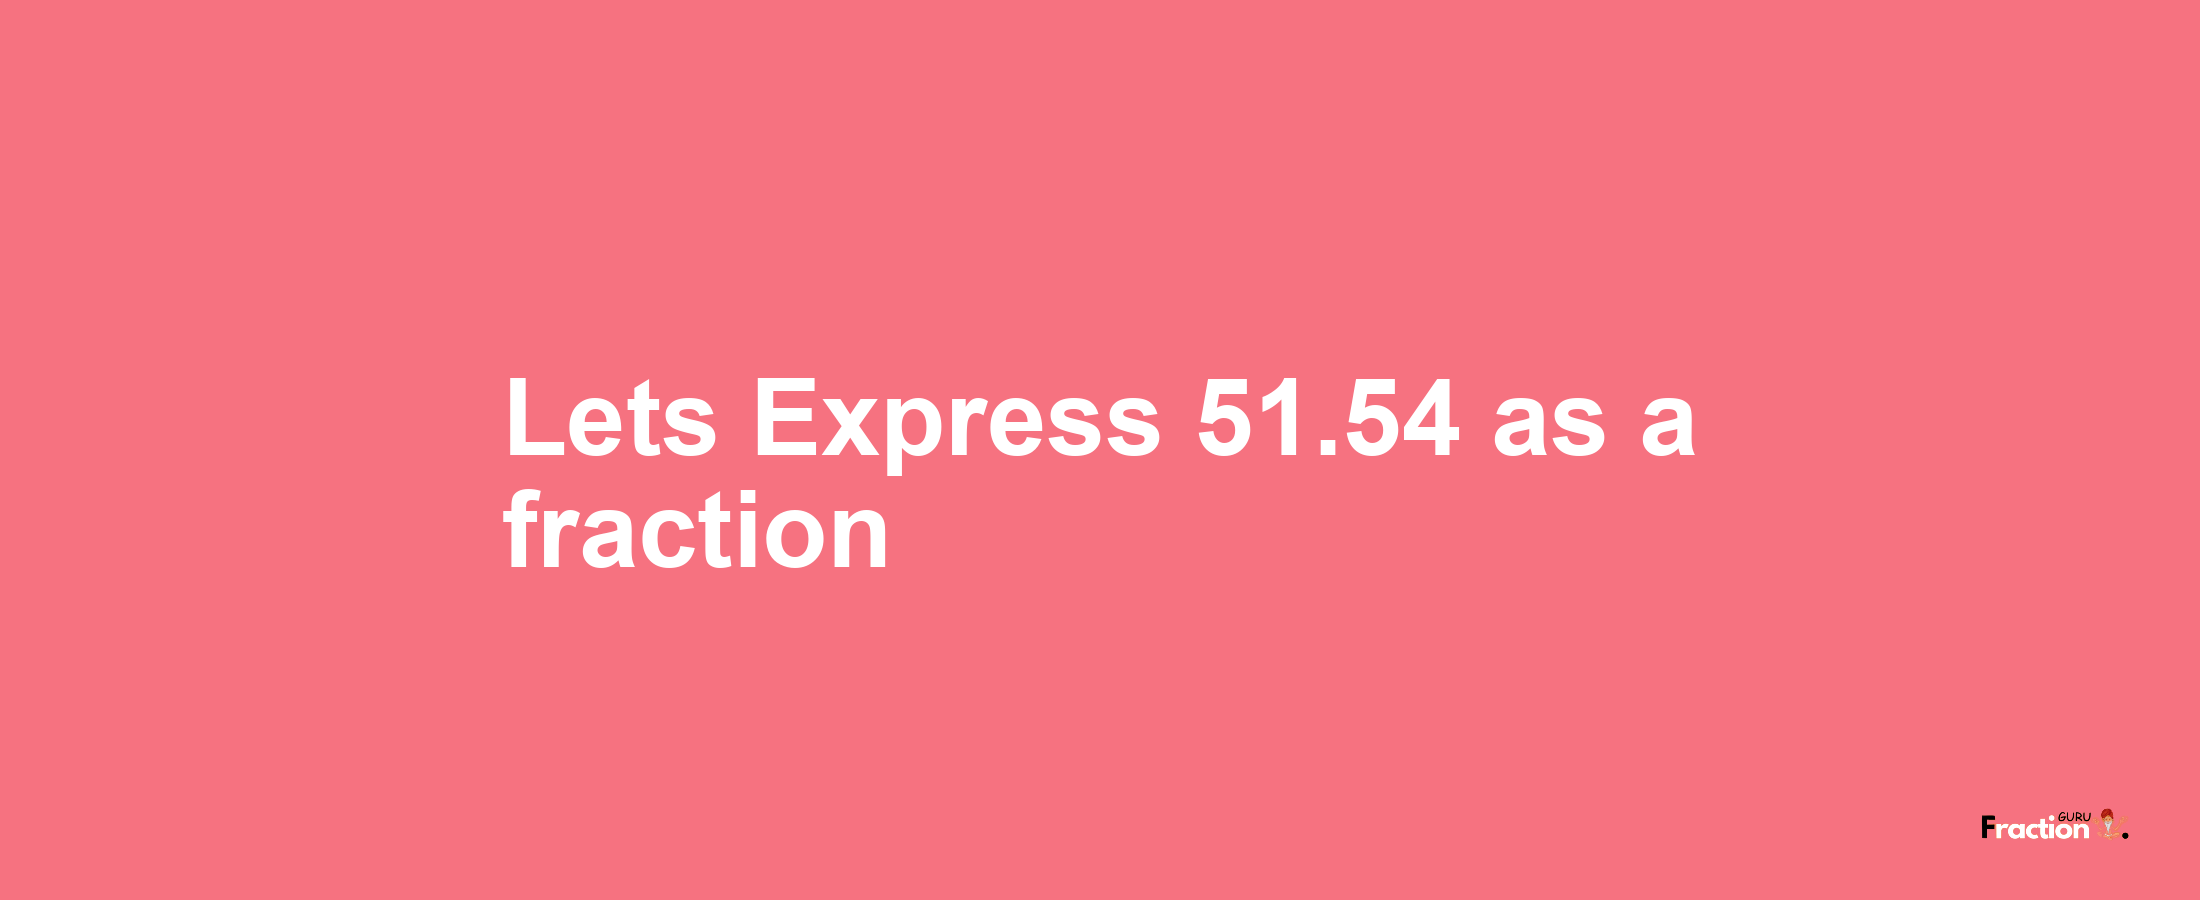 Lets Express 51.54 as afraction